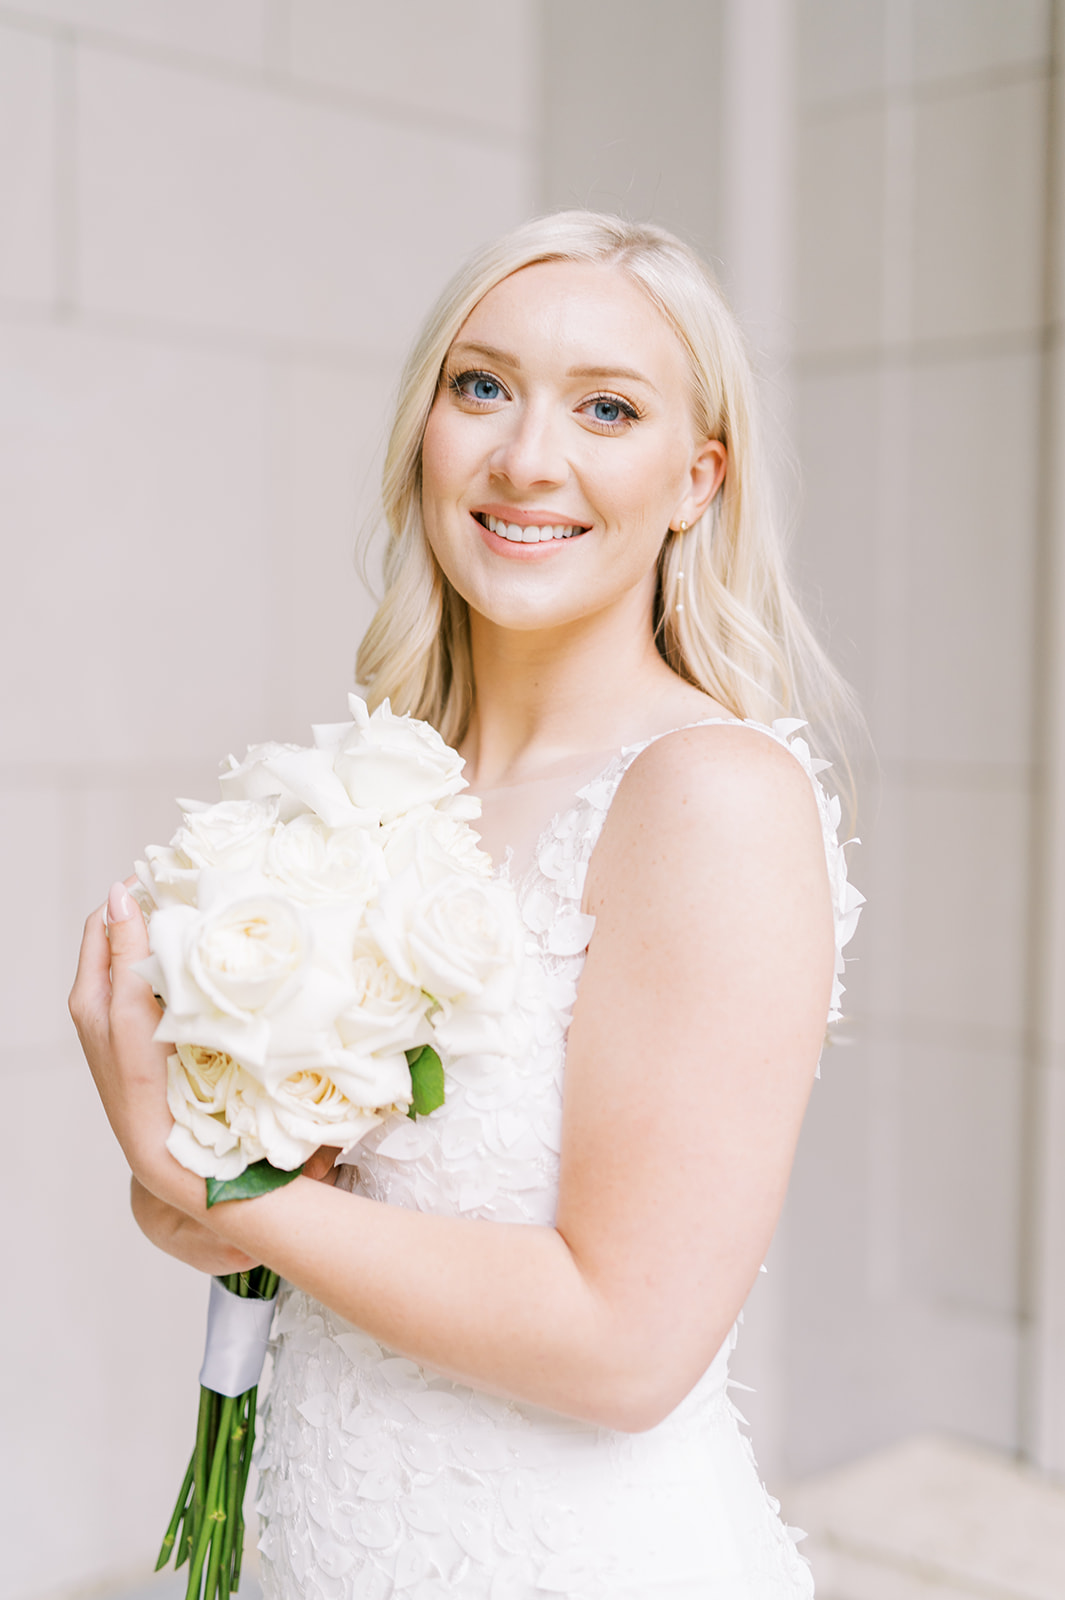 Bride smiling at camera holding bouquet of long-stem white roses